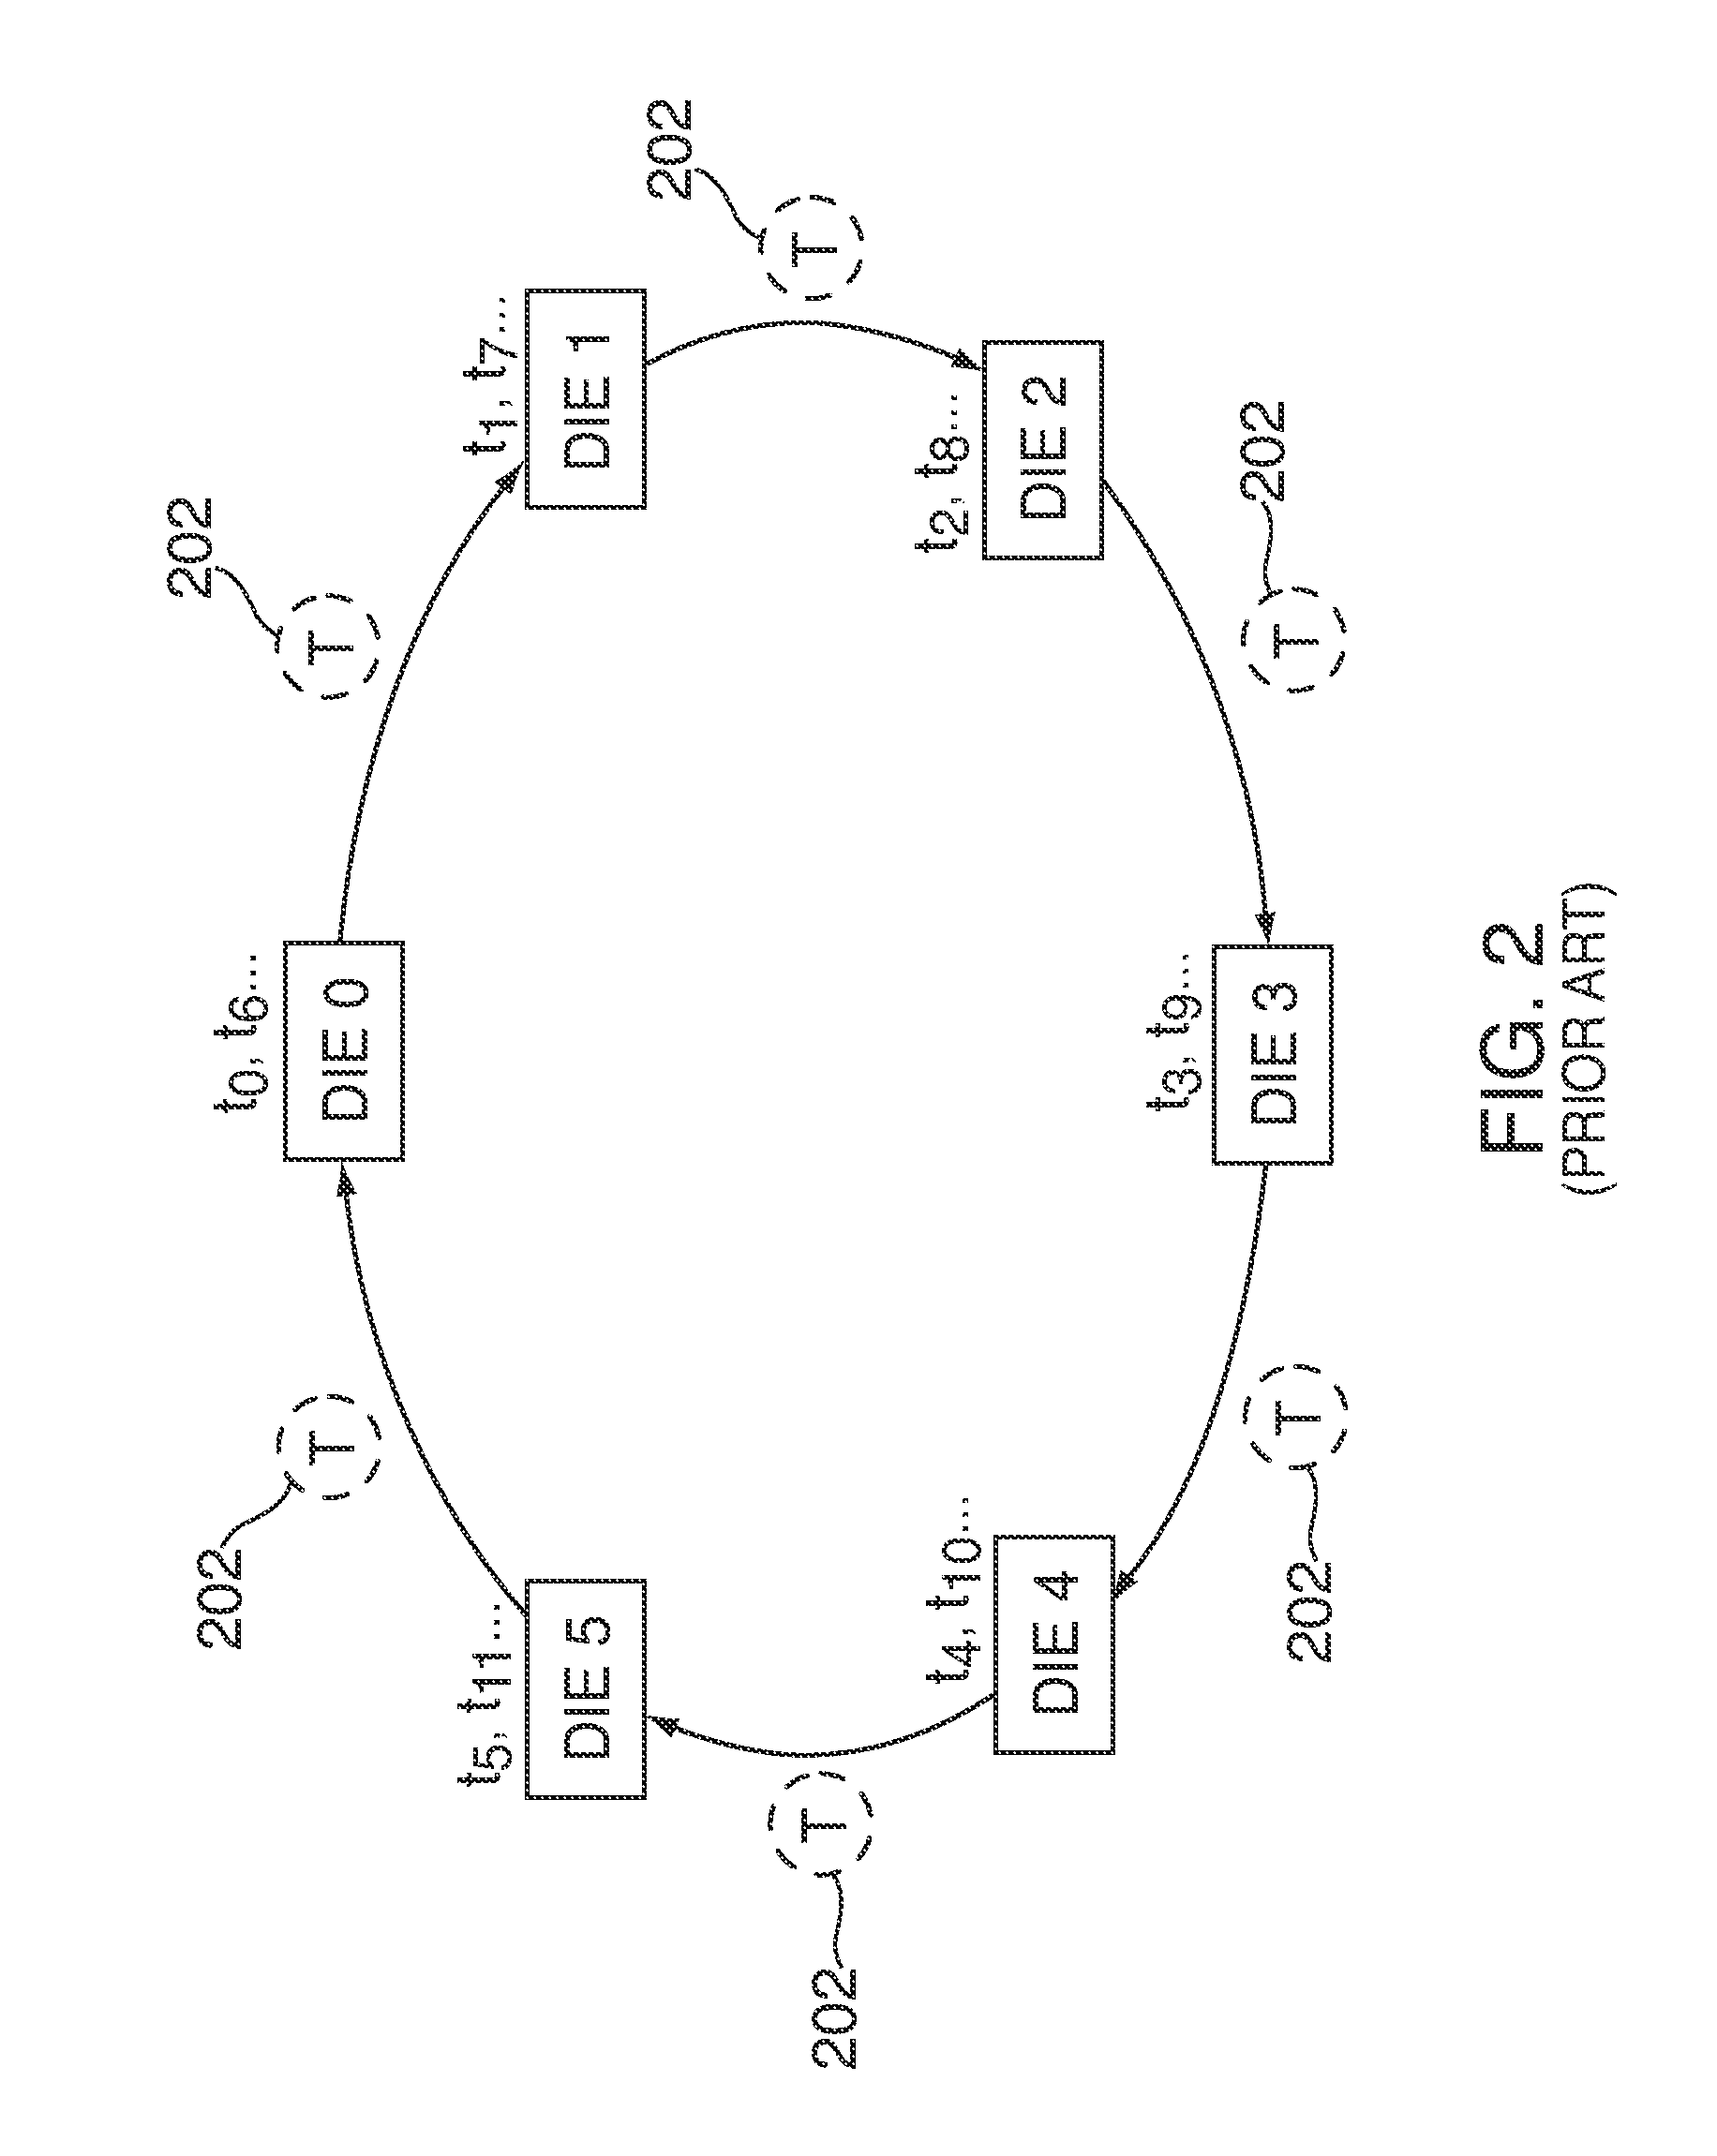 Asynchronous management of access requests to control power consumption